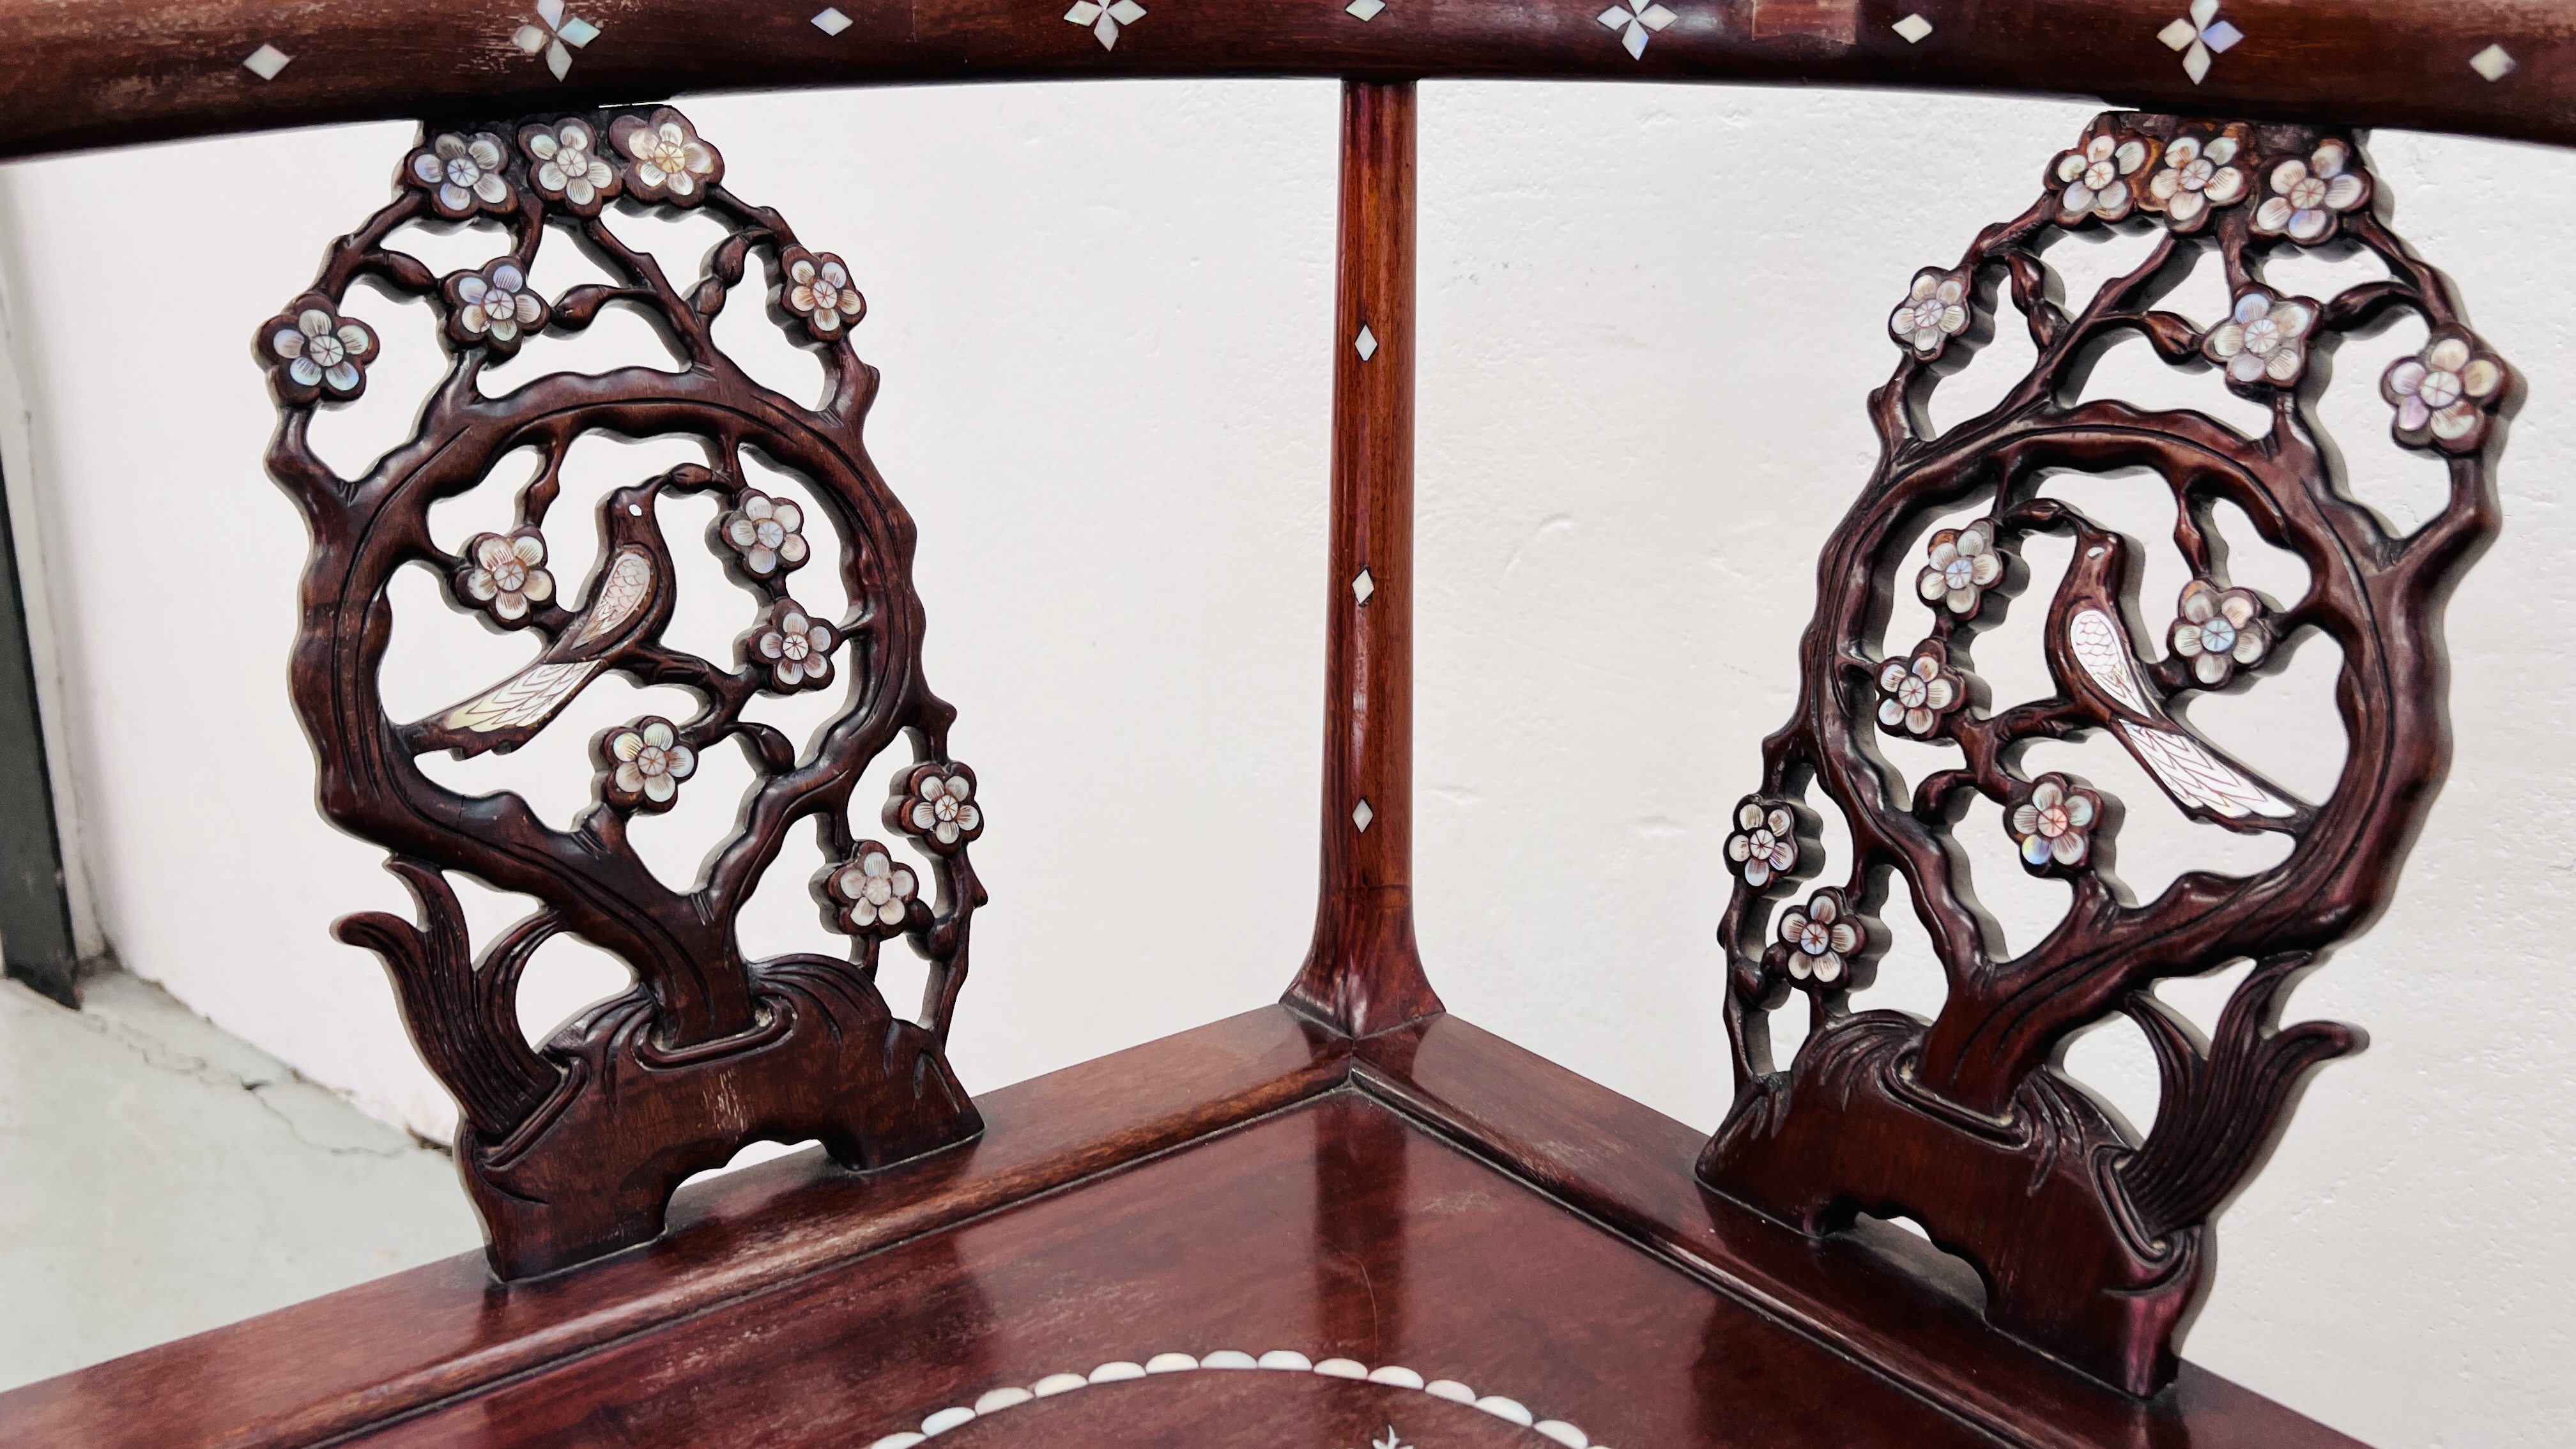 A PAIR OF ORIENTAL HARDWOOD AND MOTHER OF PEARL INLAID CORNER CHAIRS. - Image 10 of 14